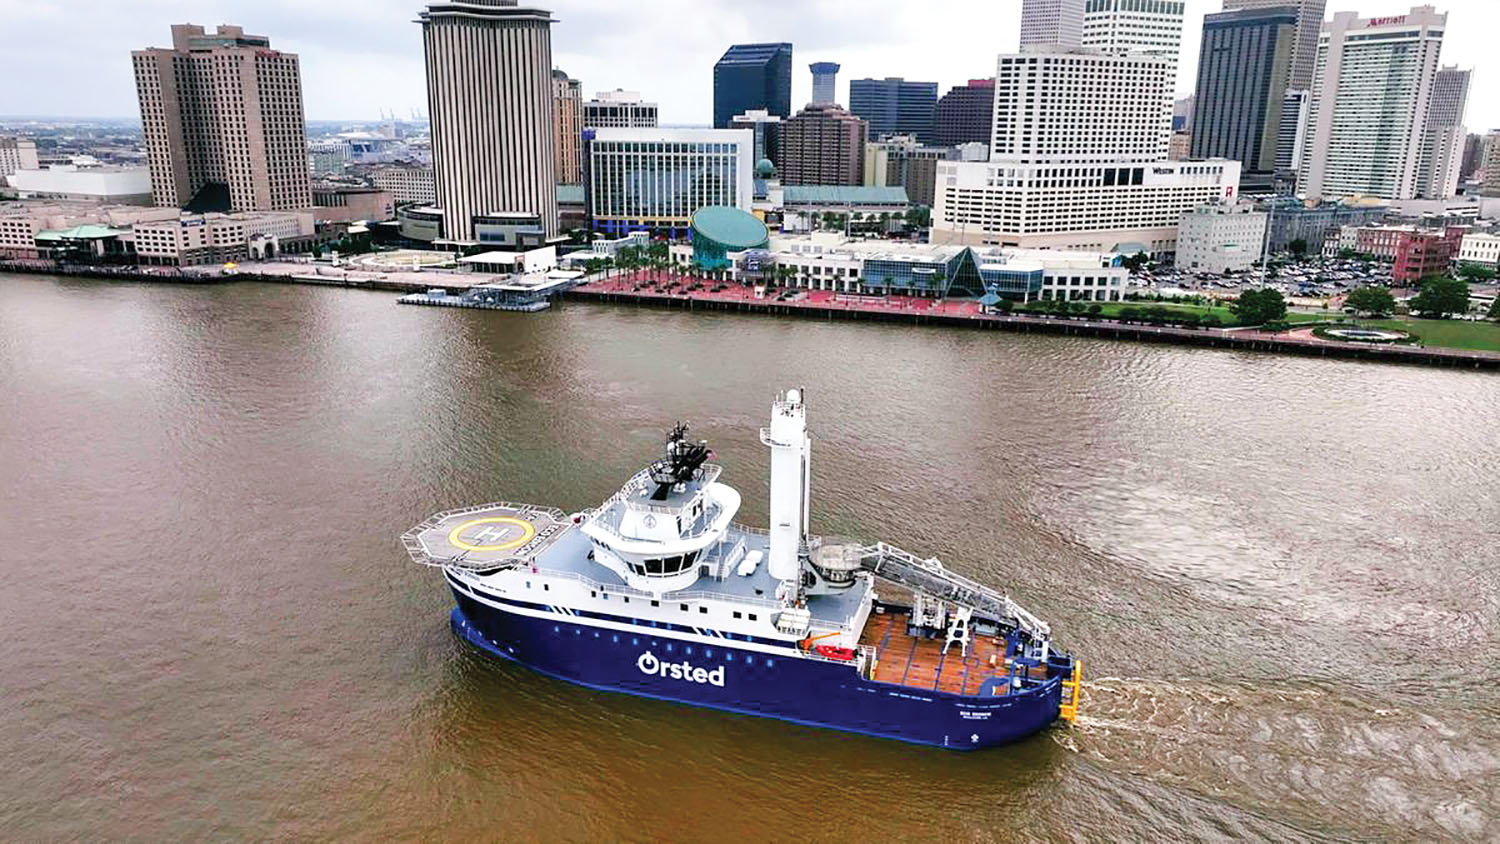 Ørsted, Chouest Christen First American-Built Offshore Wind Operations Vessel